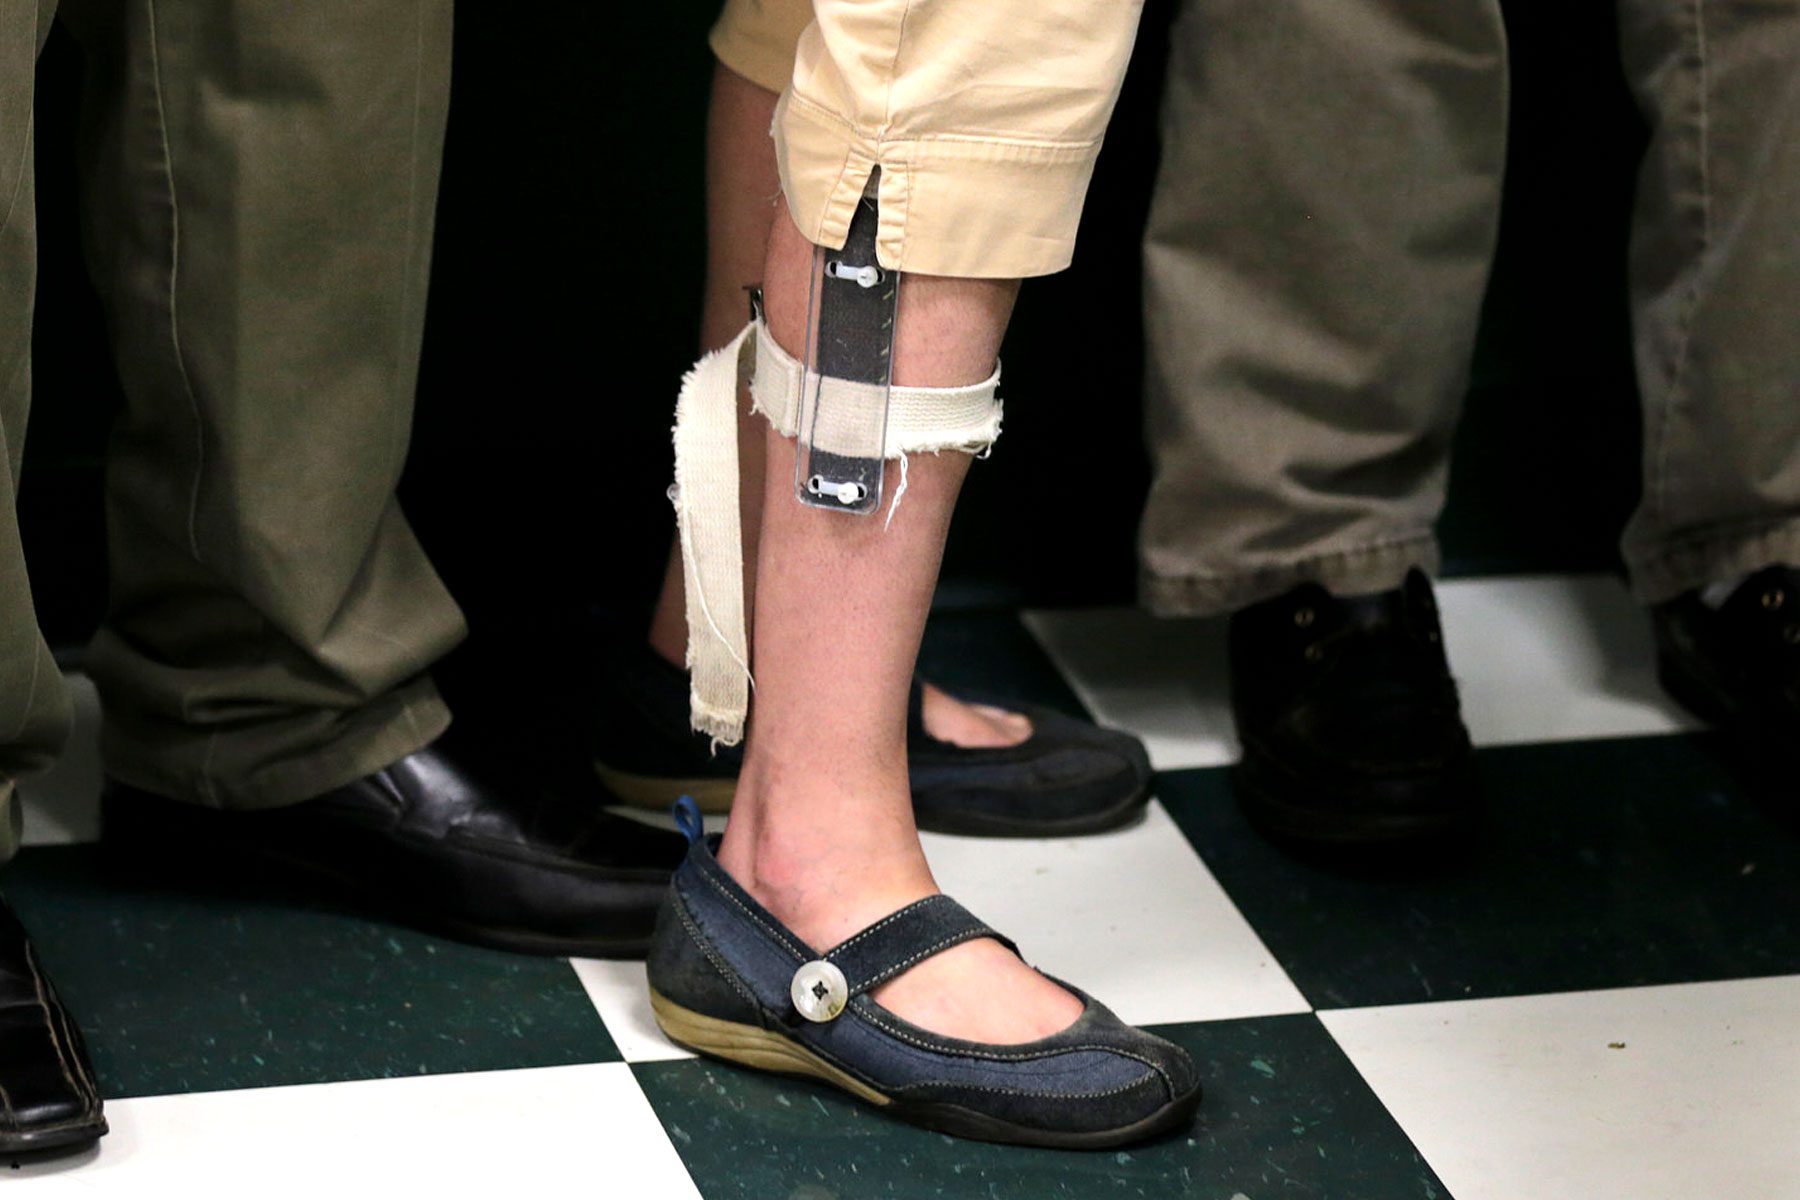 A female student wears a shocking device on her leg.